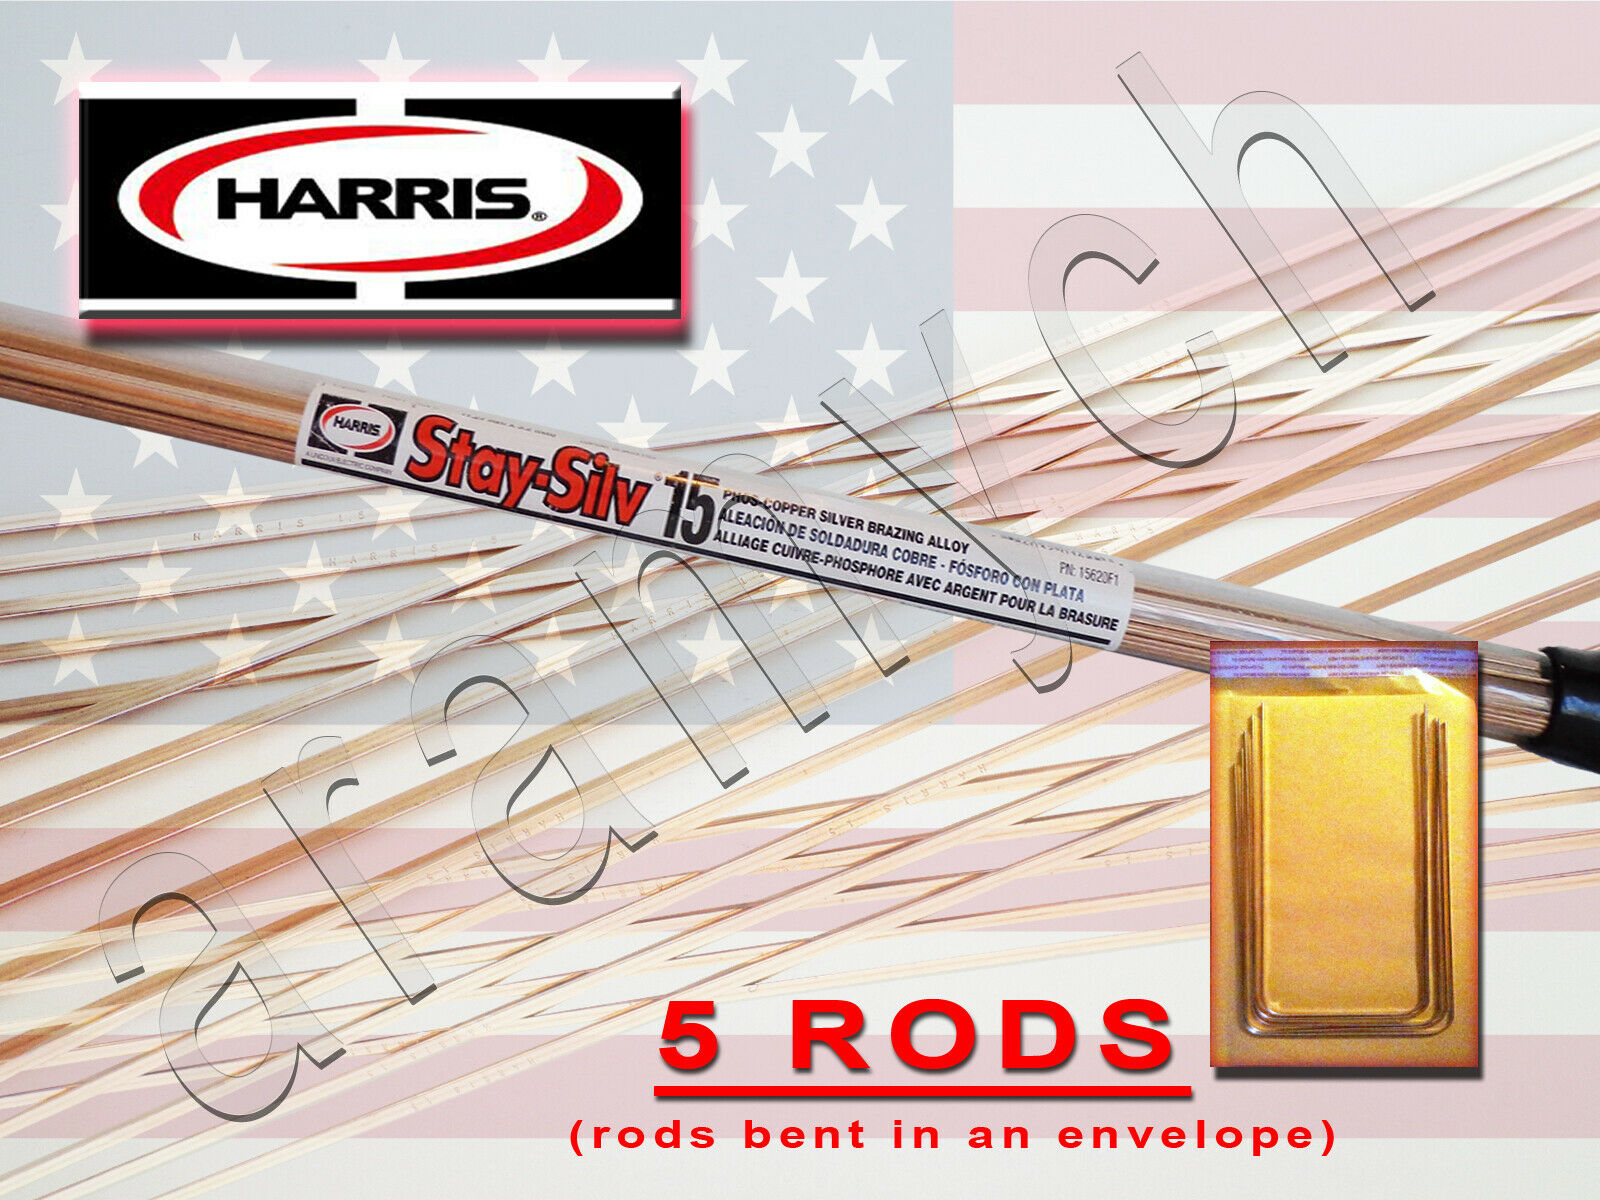 5 Rods Brazing Rods Harris Stay-silv 15% Soldering Rods Bcup-5